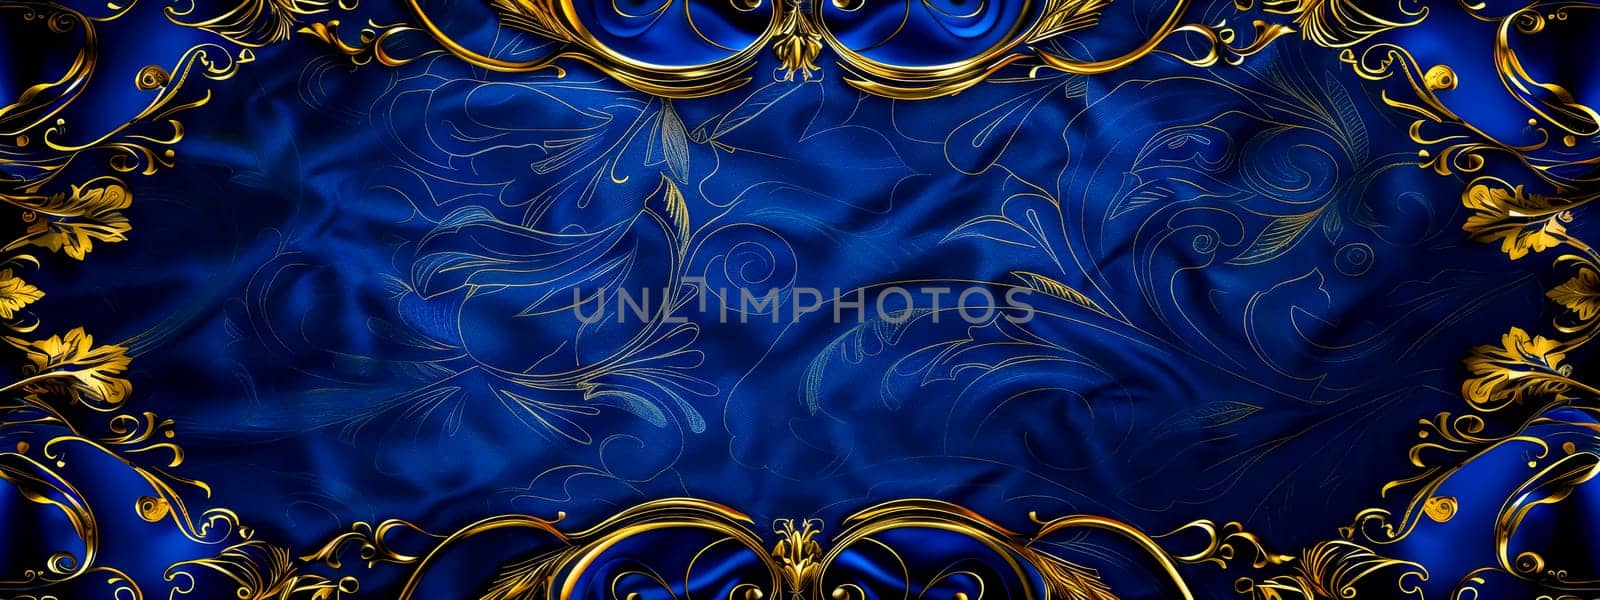 A luxurious seamless background with ornate gold floral elements on a deep blue backdrop